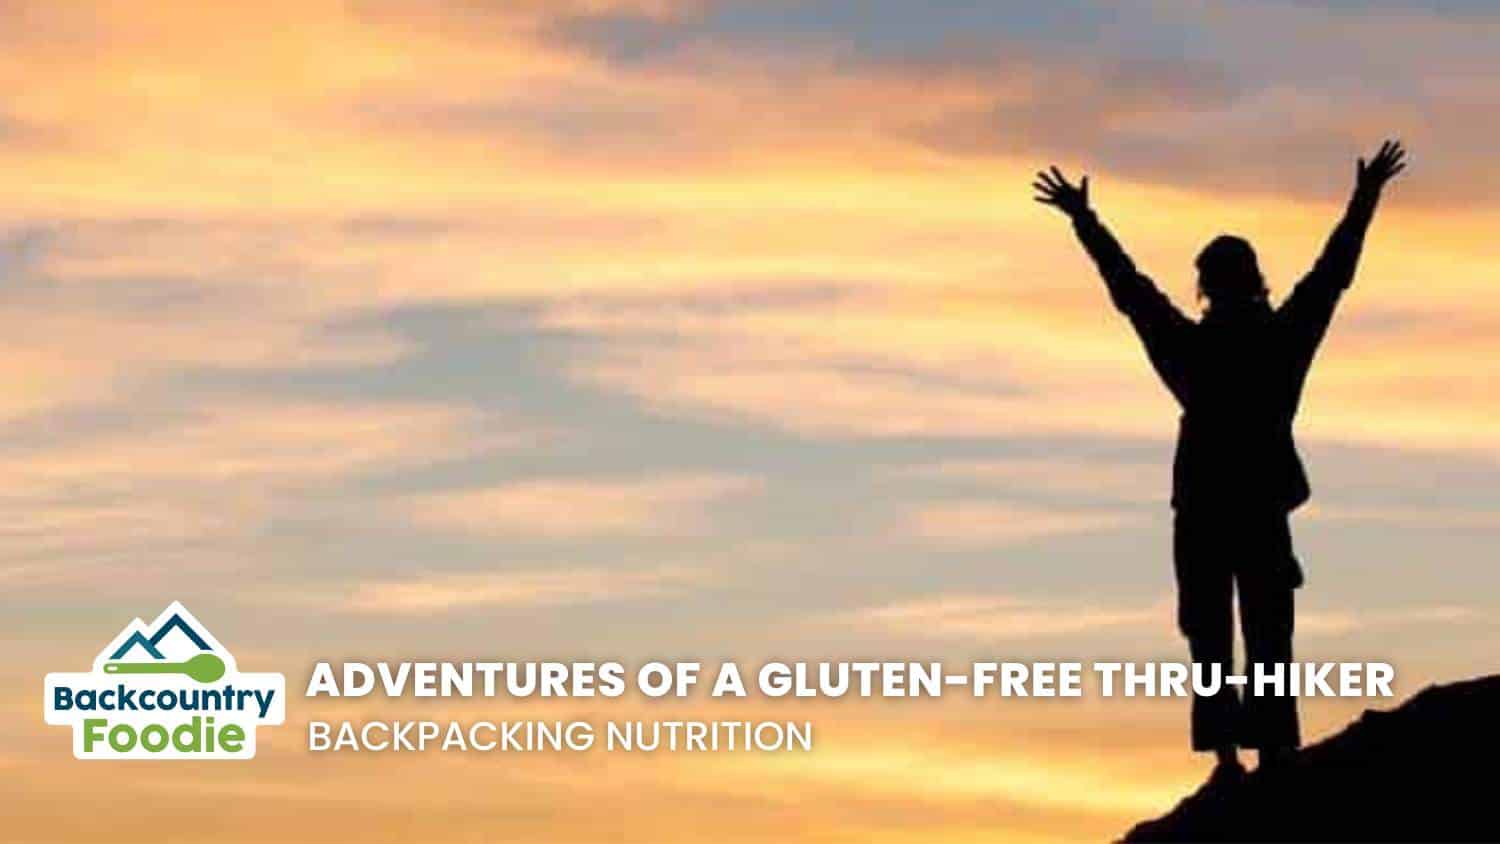 Backcountry Foodie Adventures of a Gluten-Free Thru-Hiker Blog post thumbnail